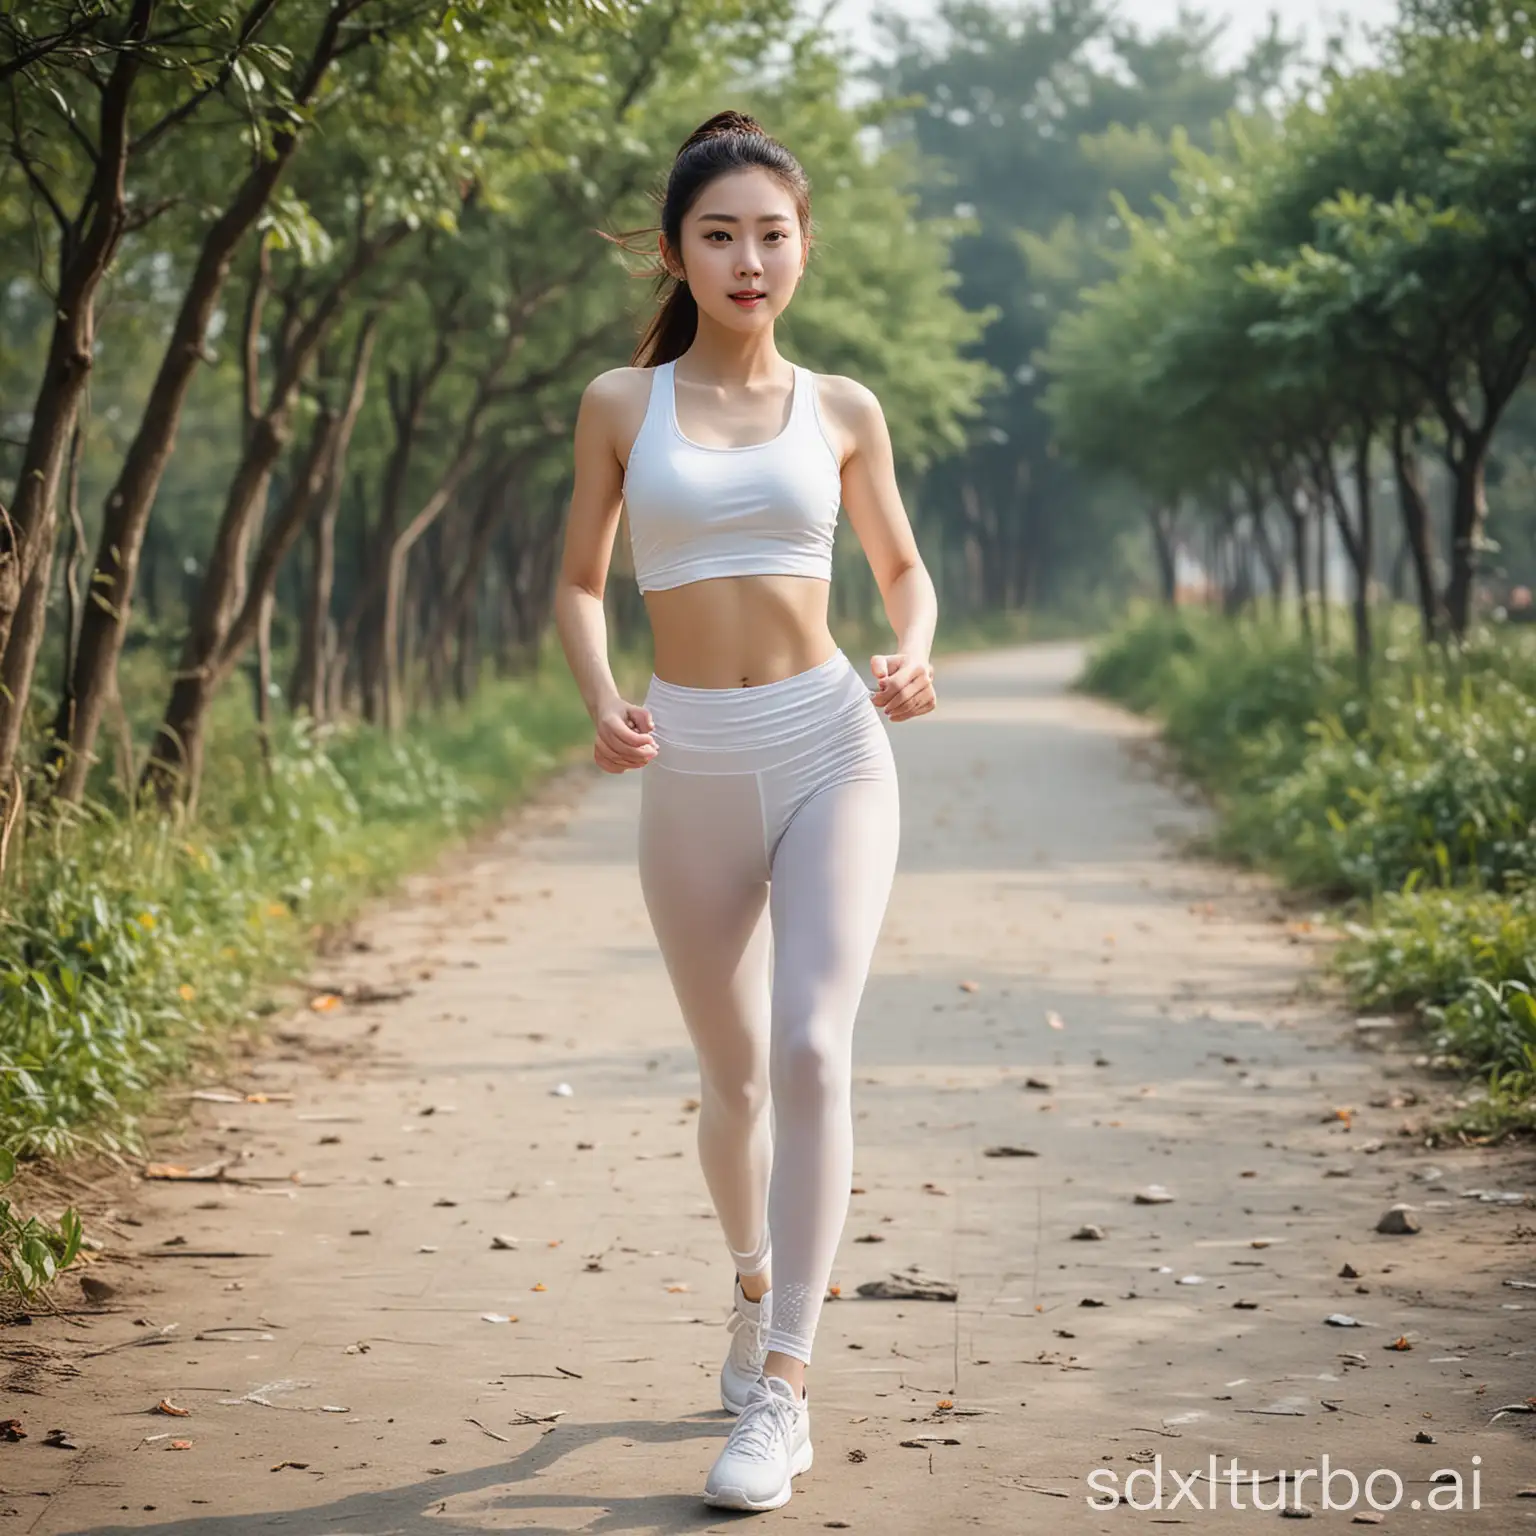 a Chinese beautiful girl running while wearing white translucent yoga pants